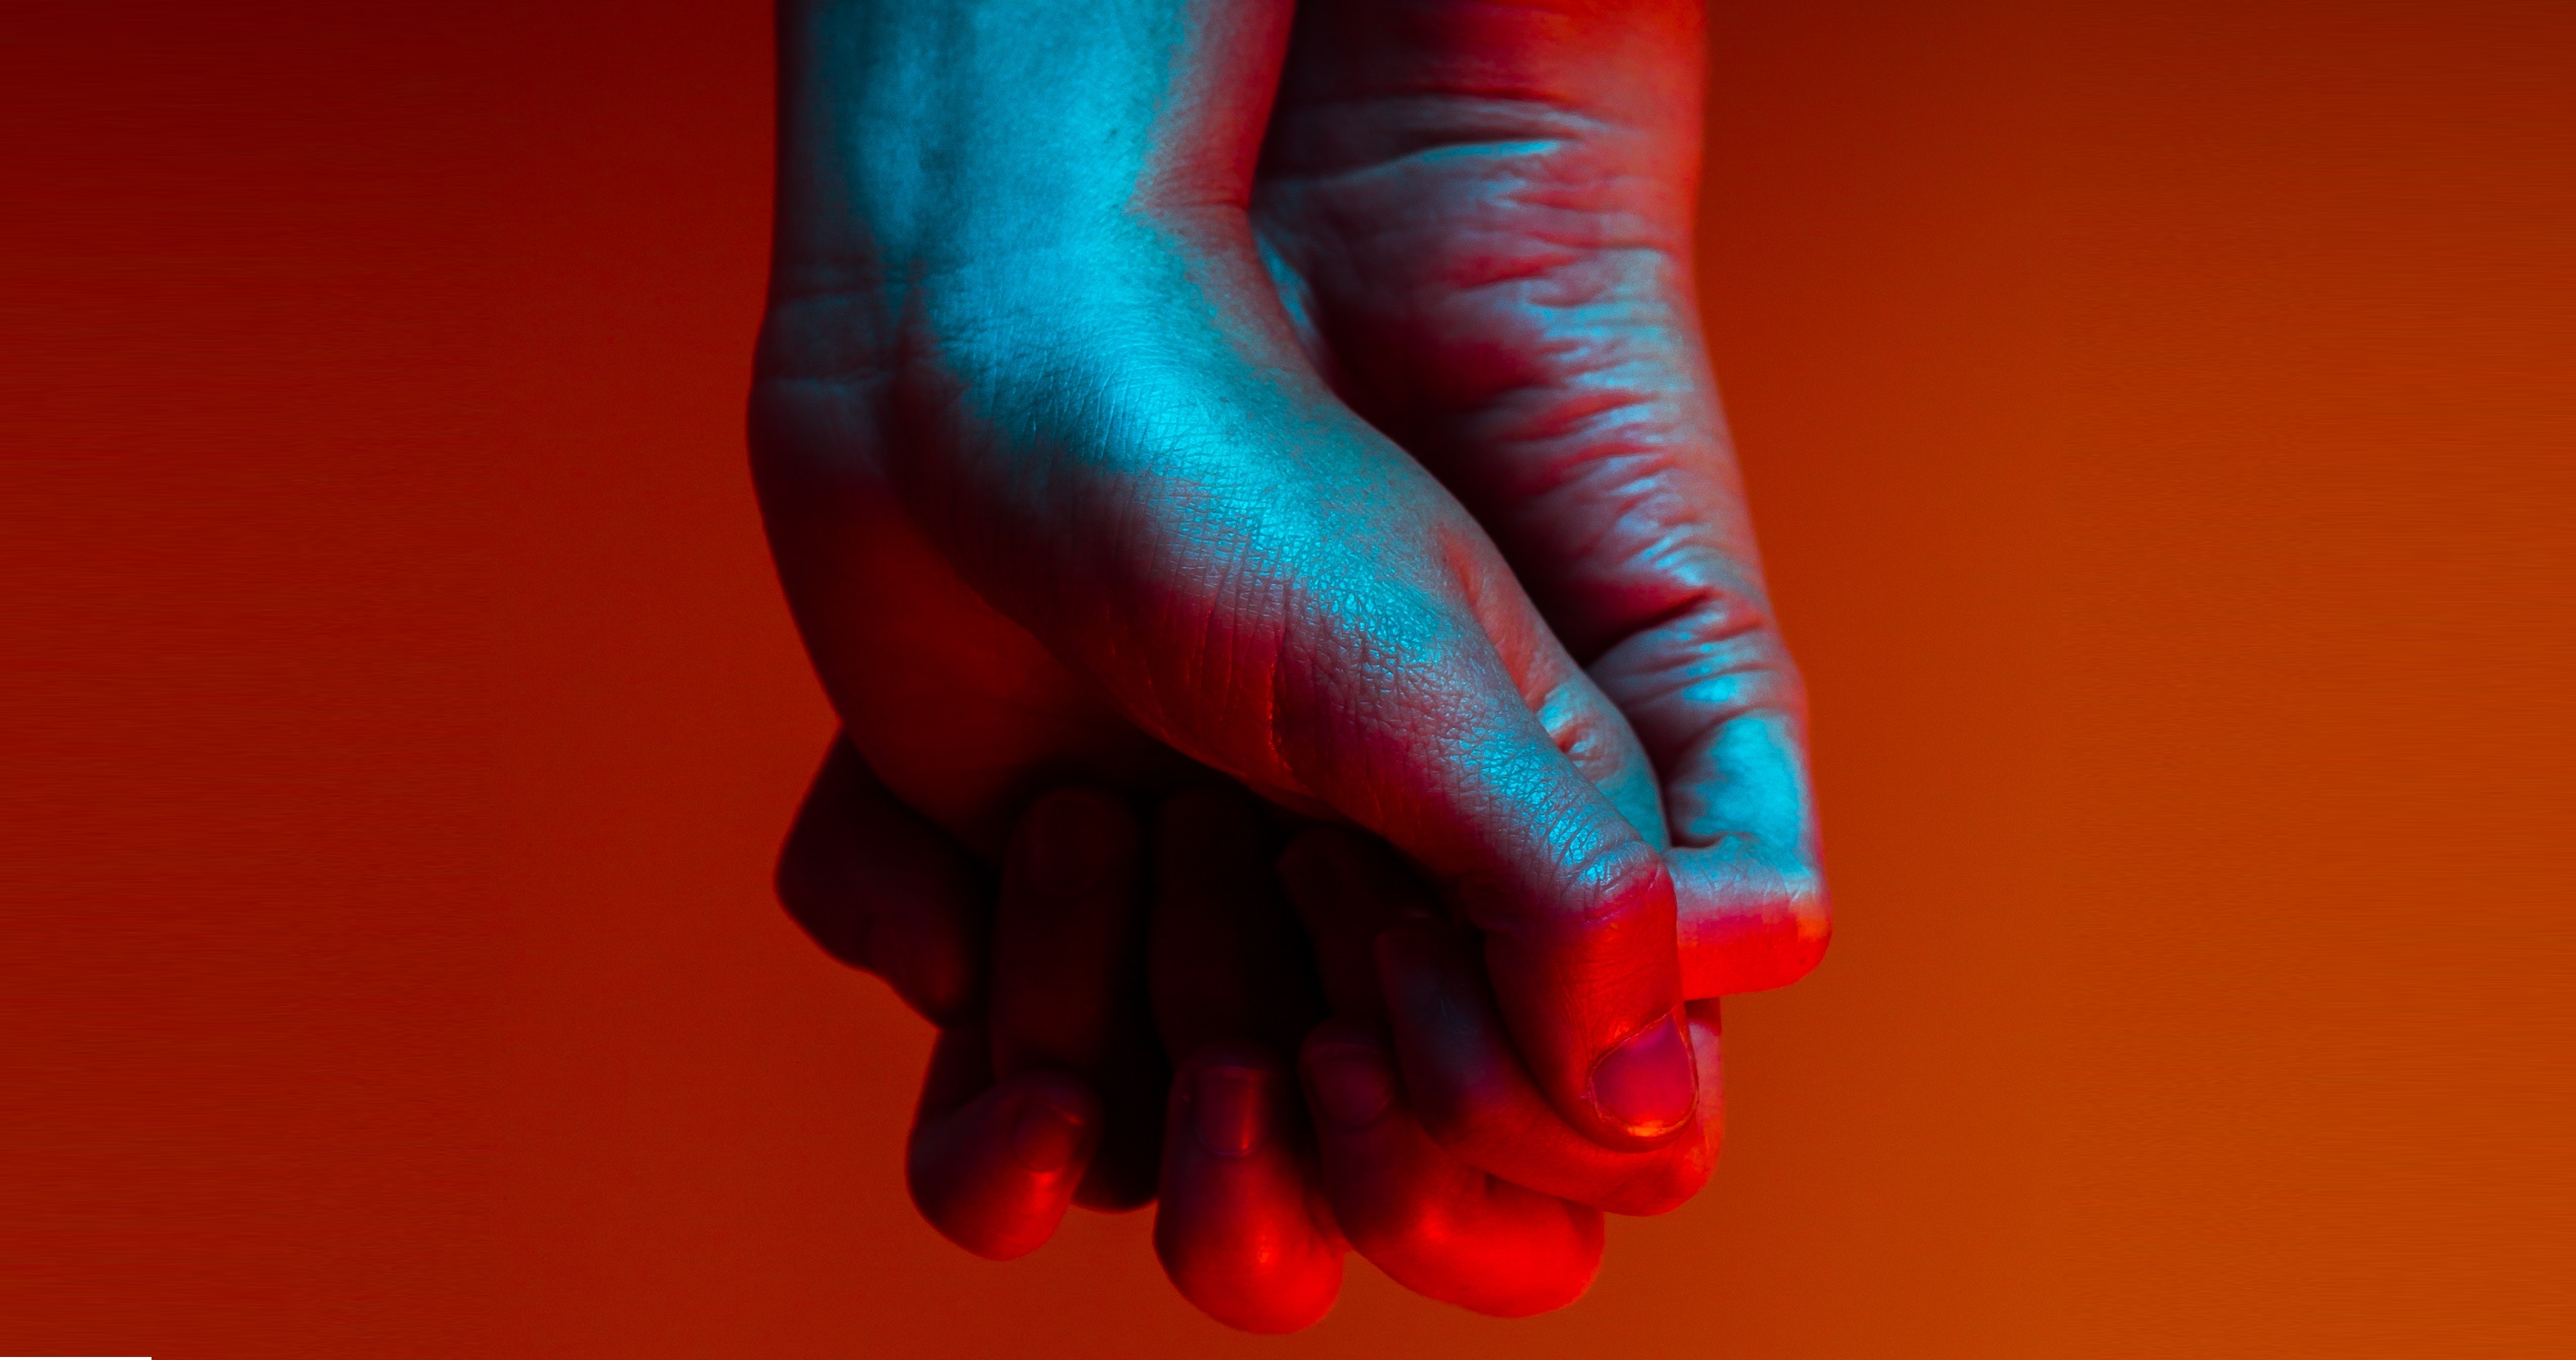 Image of two hands clasping each other